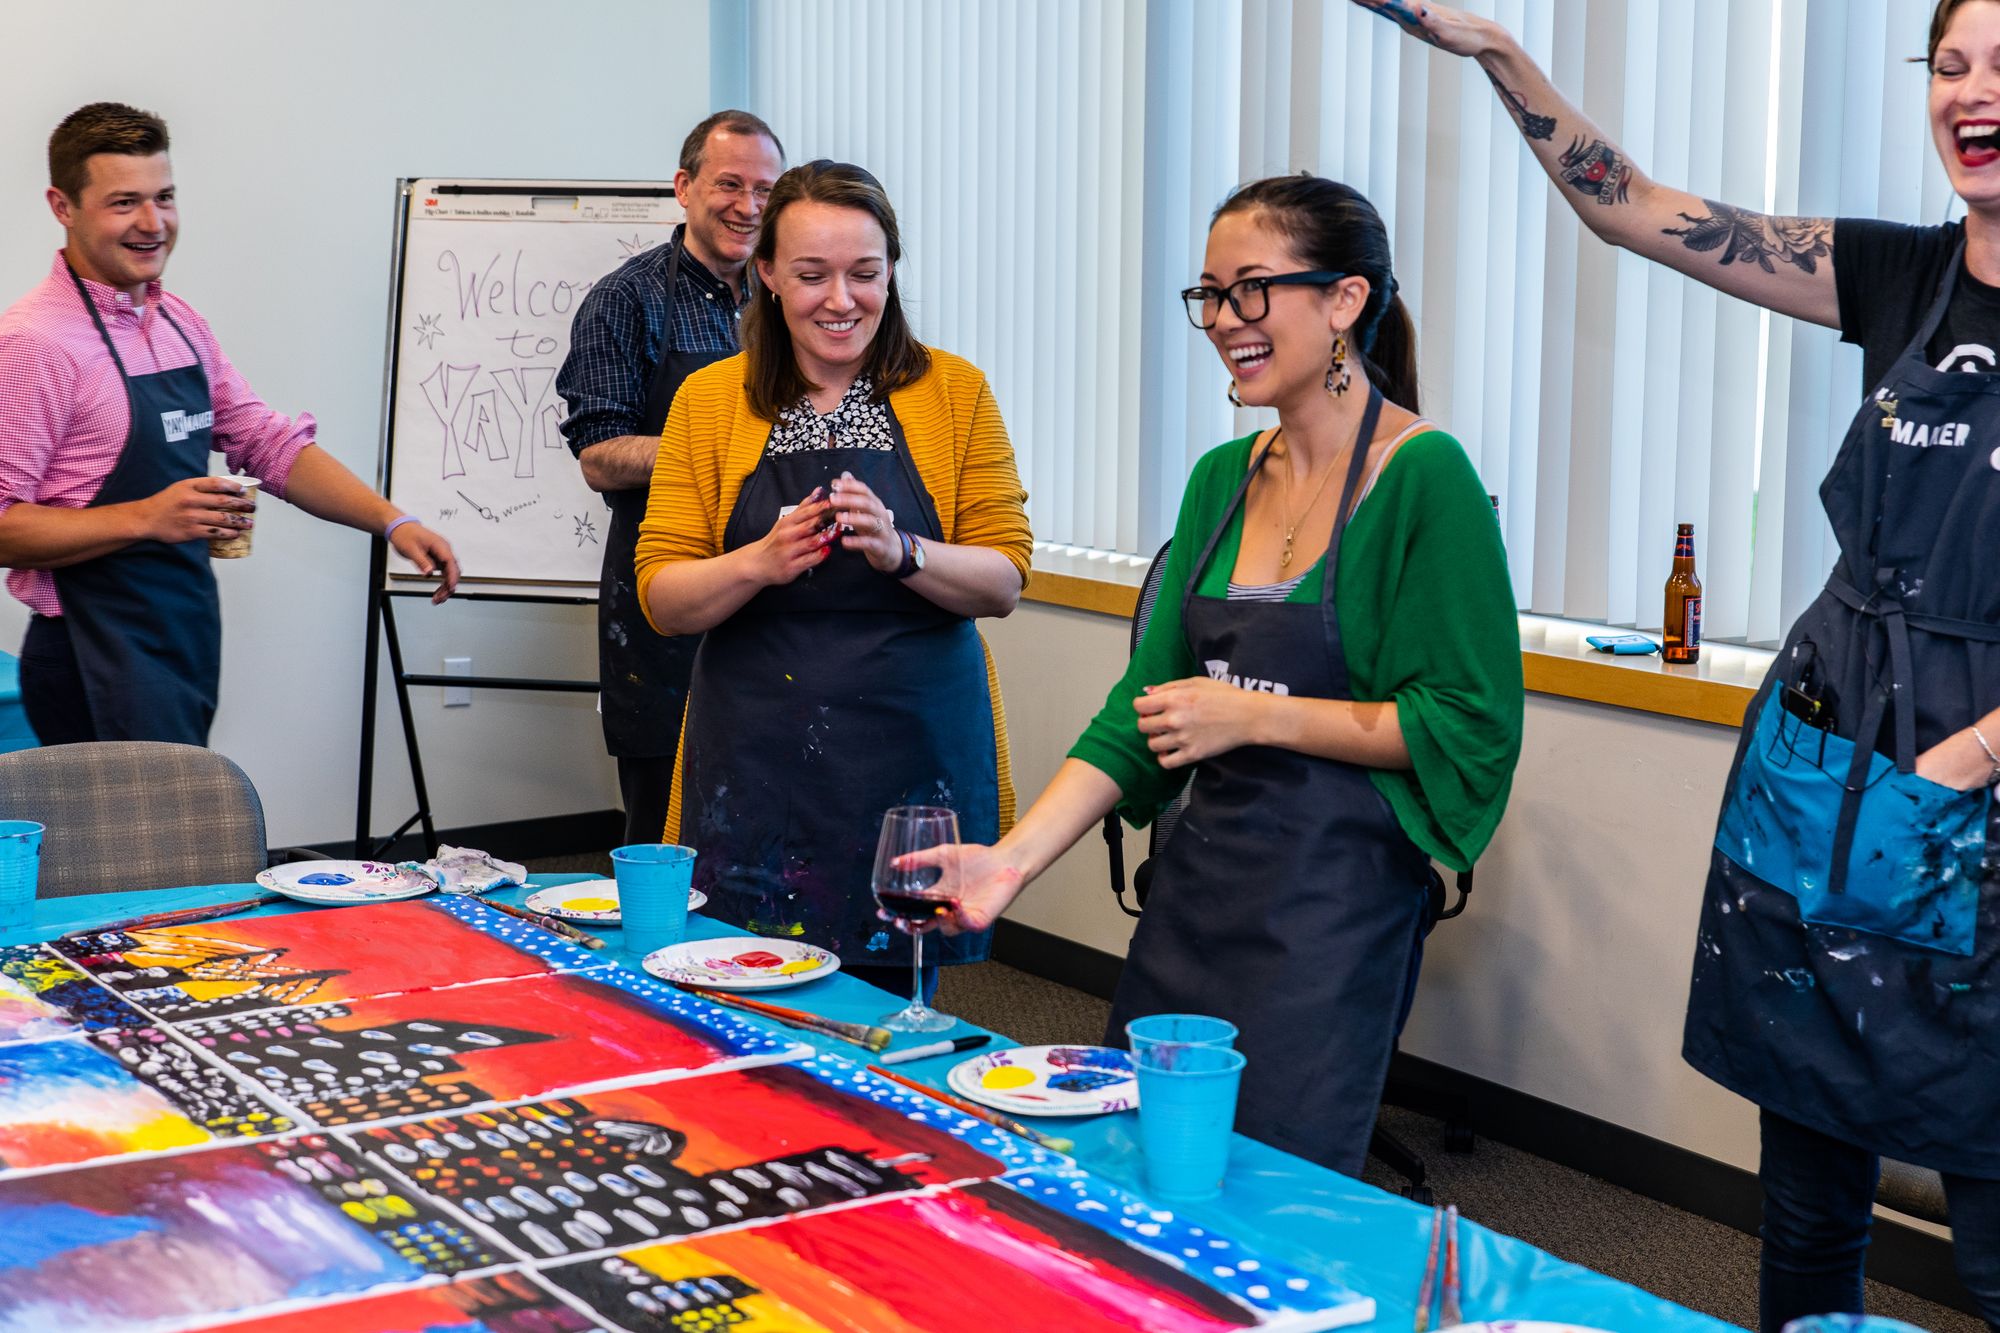 Team members having fun at a paint and sip corporate event.